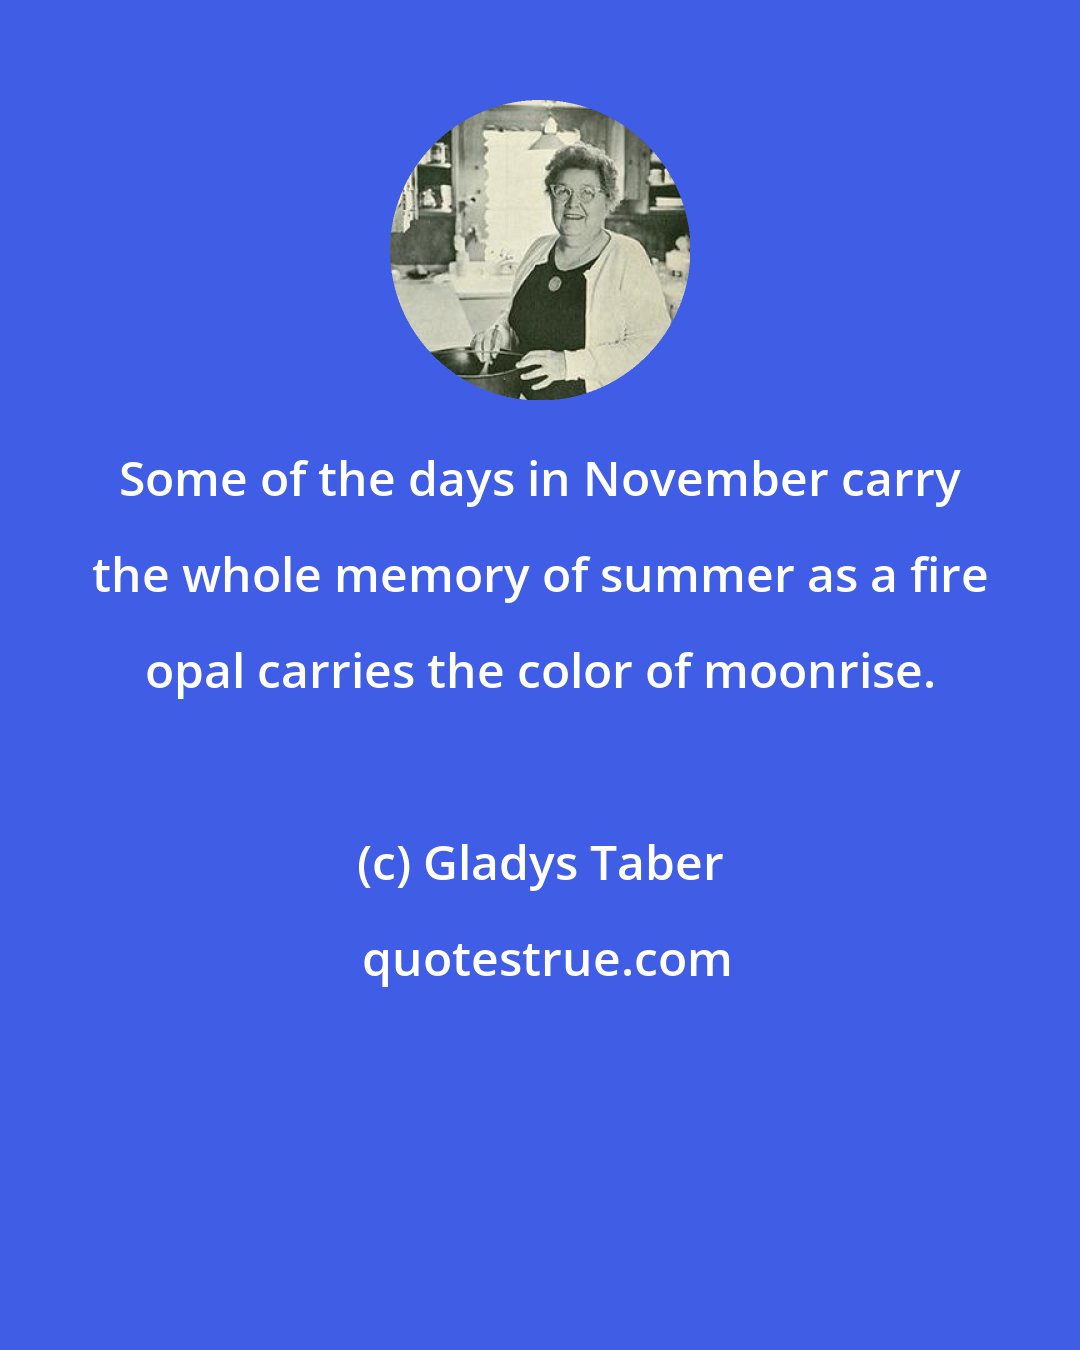 Gladys Taber: Some of the days in November carry the whole memory of summer as a fire opal carries the color of moonrise.